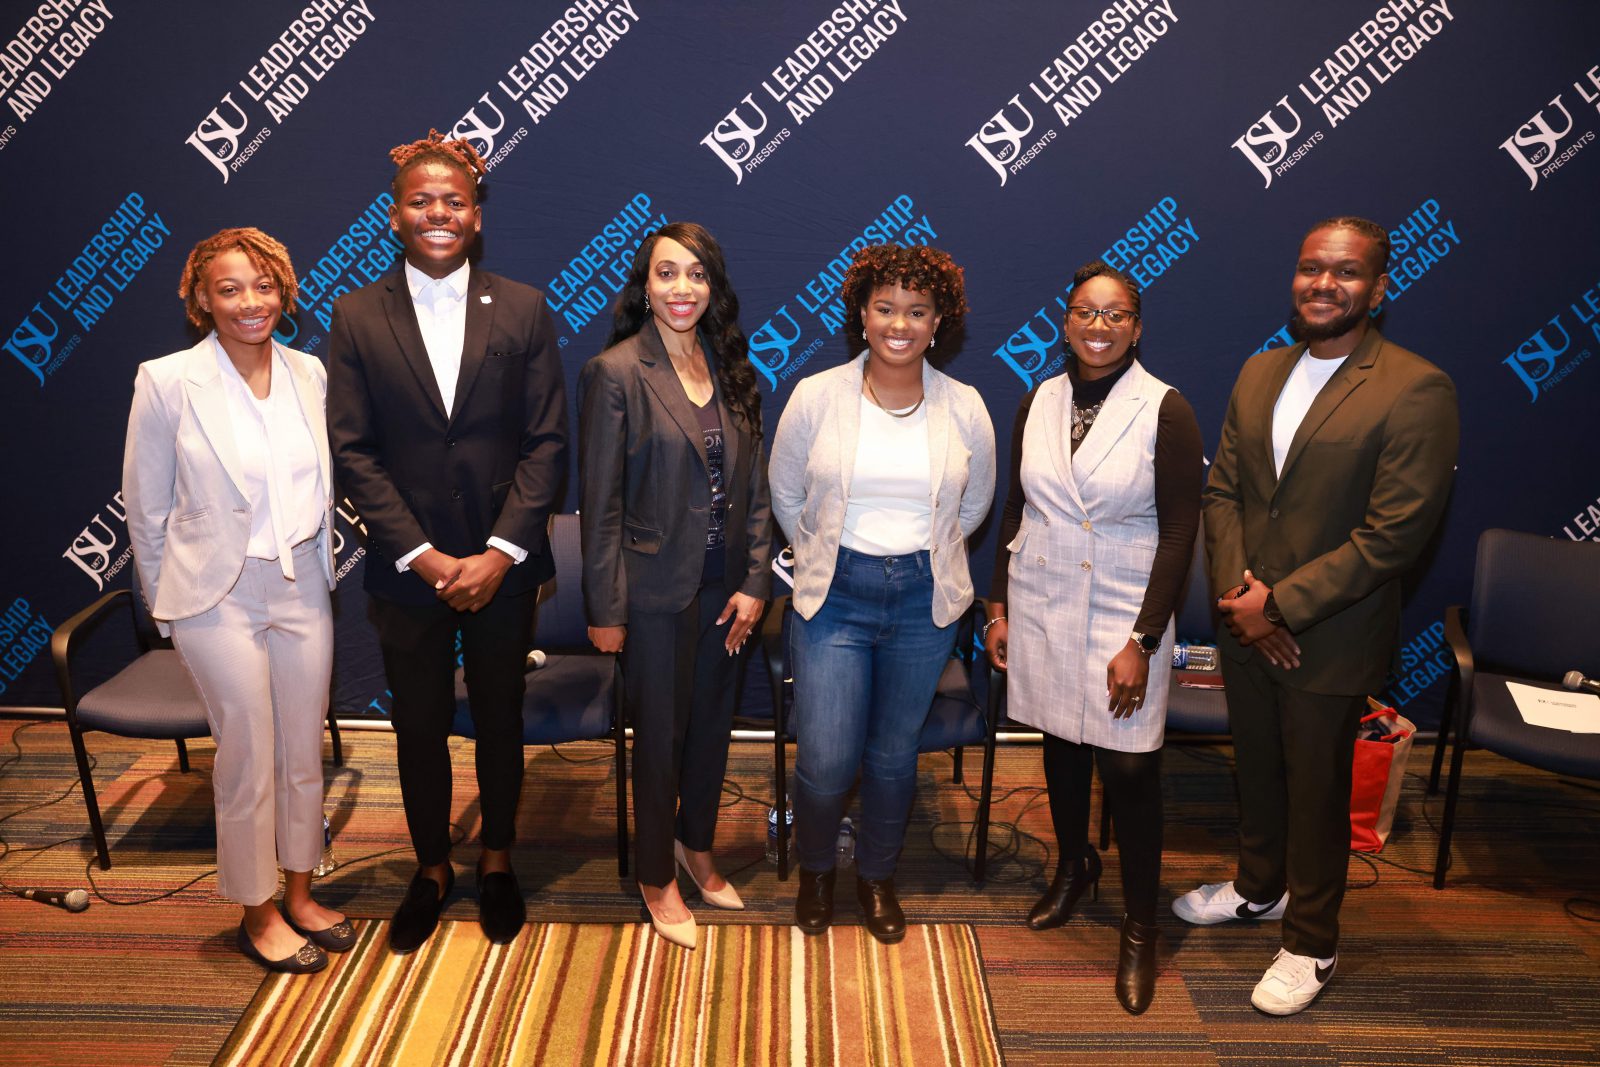 JSU’s THEE Pathway Speaker Series empowers students to find their voice and take action